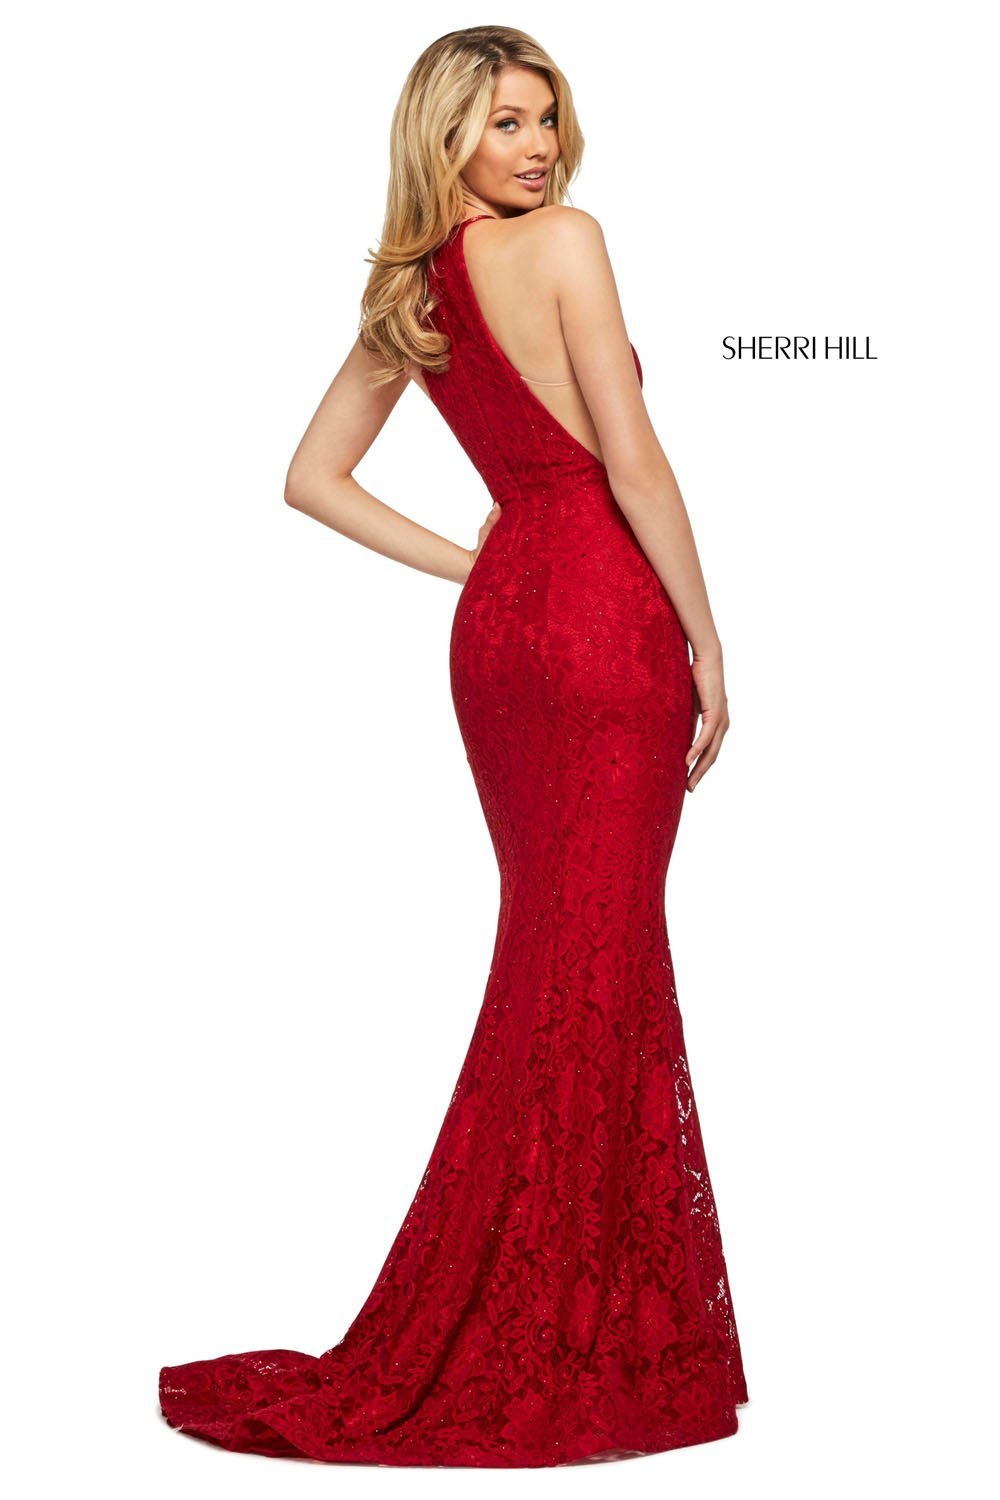 Sherri Hill 53361 dress images in these colors: Red, Ivory, Black, Royal, Peacock, Yellow, Blush, Coral, Navy, Light Yellow, Teal, Pink, Jade, Aqua, Dark Red, Bright Pink.